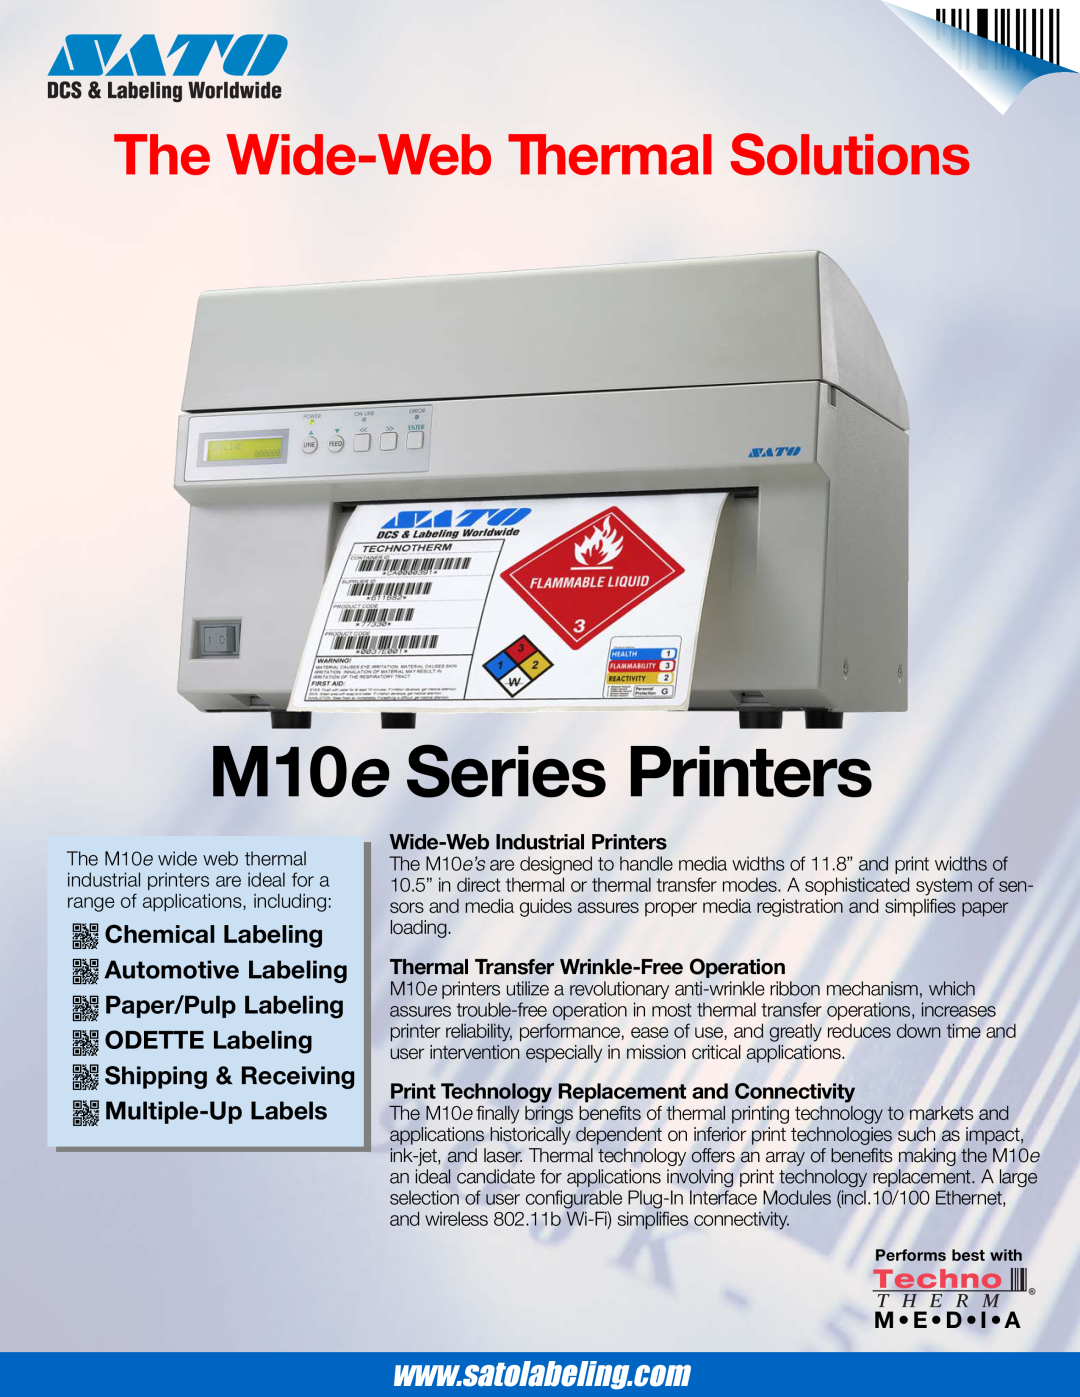 SATO manual M10e Series Printers, The Wide-Web Thermal Solutions, M E D I A, Wide-Web Industrial Printers 